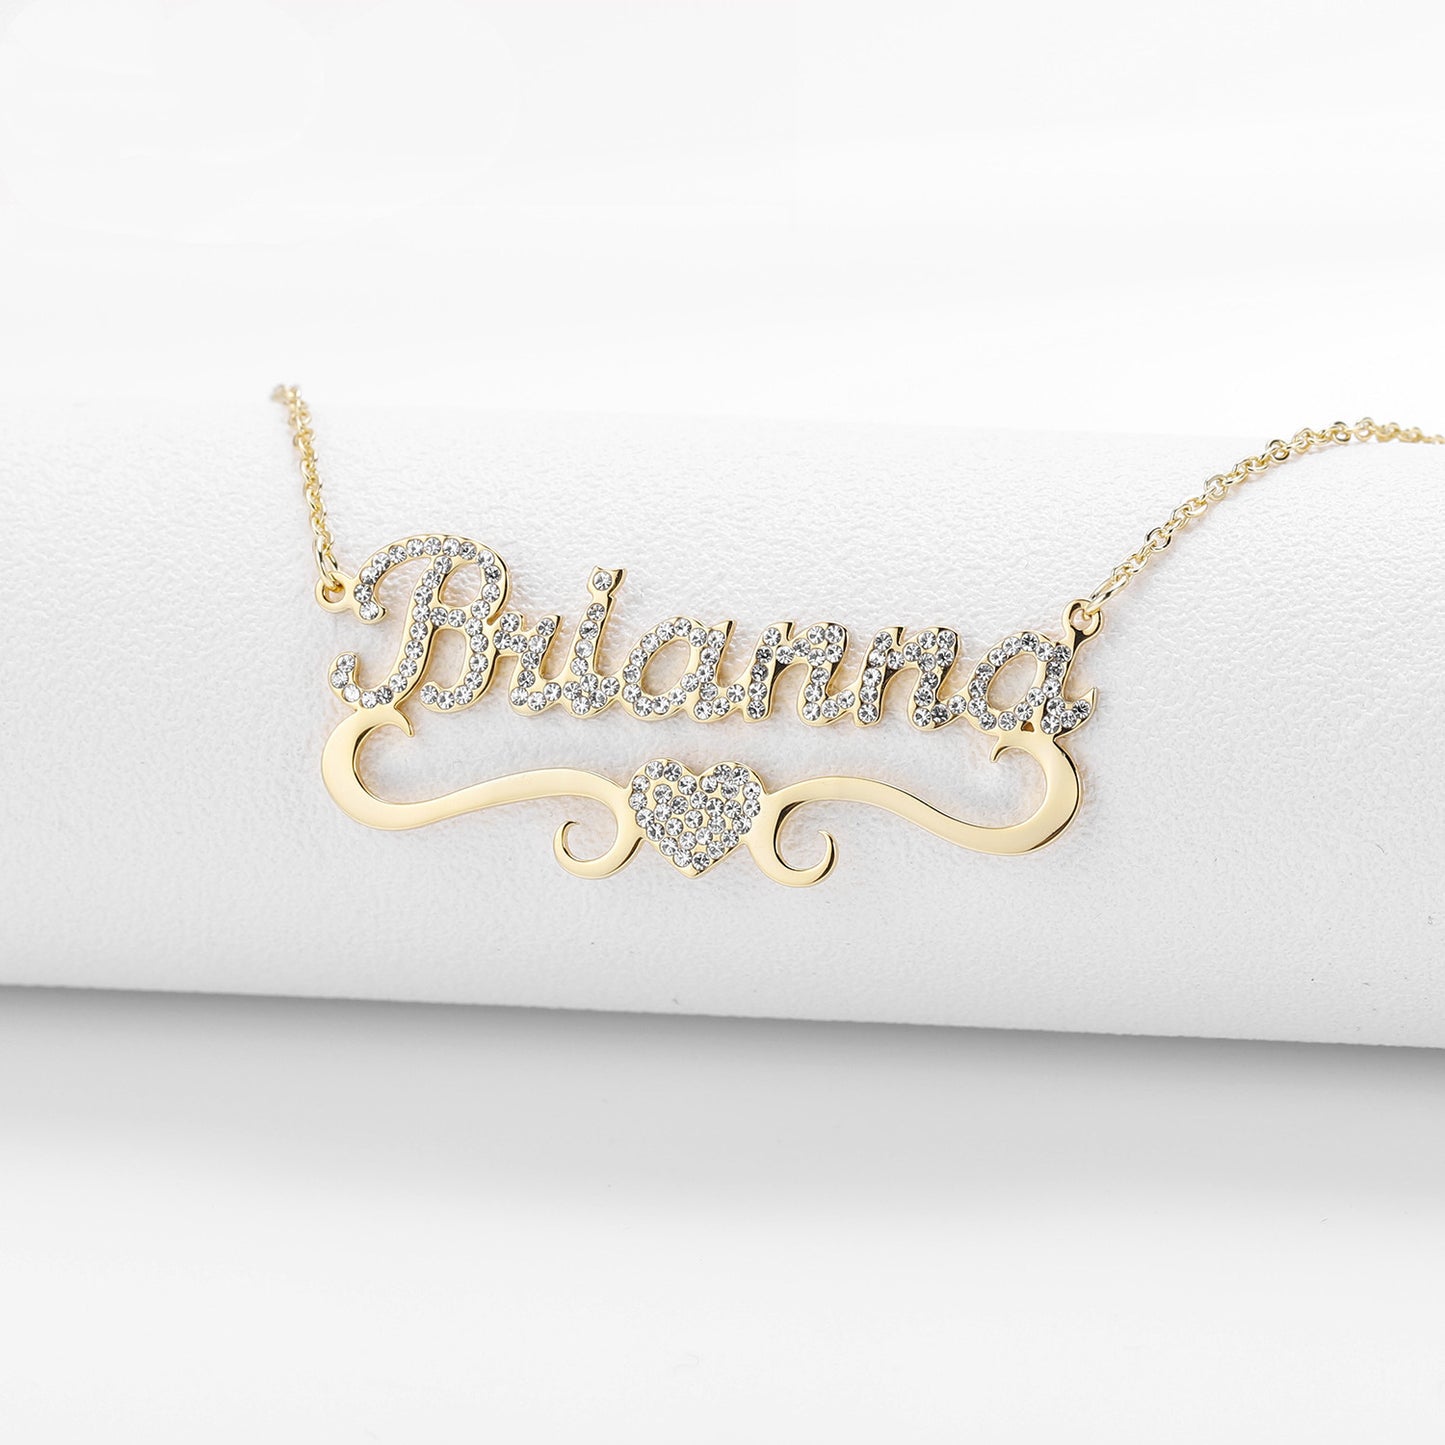 Personalized Iced Out Name Necklace